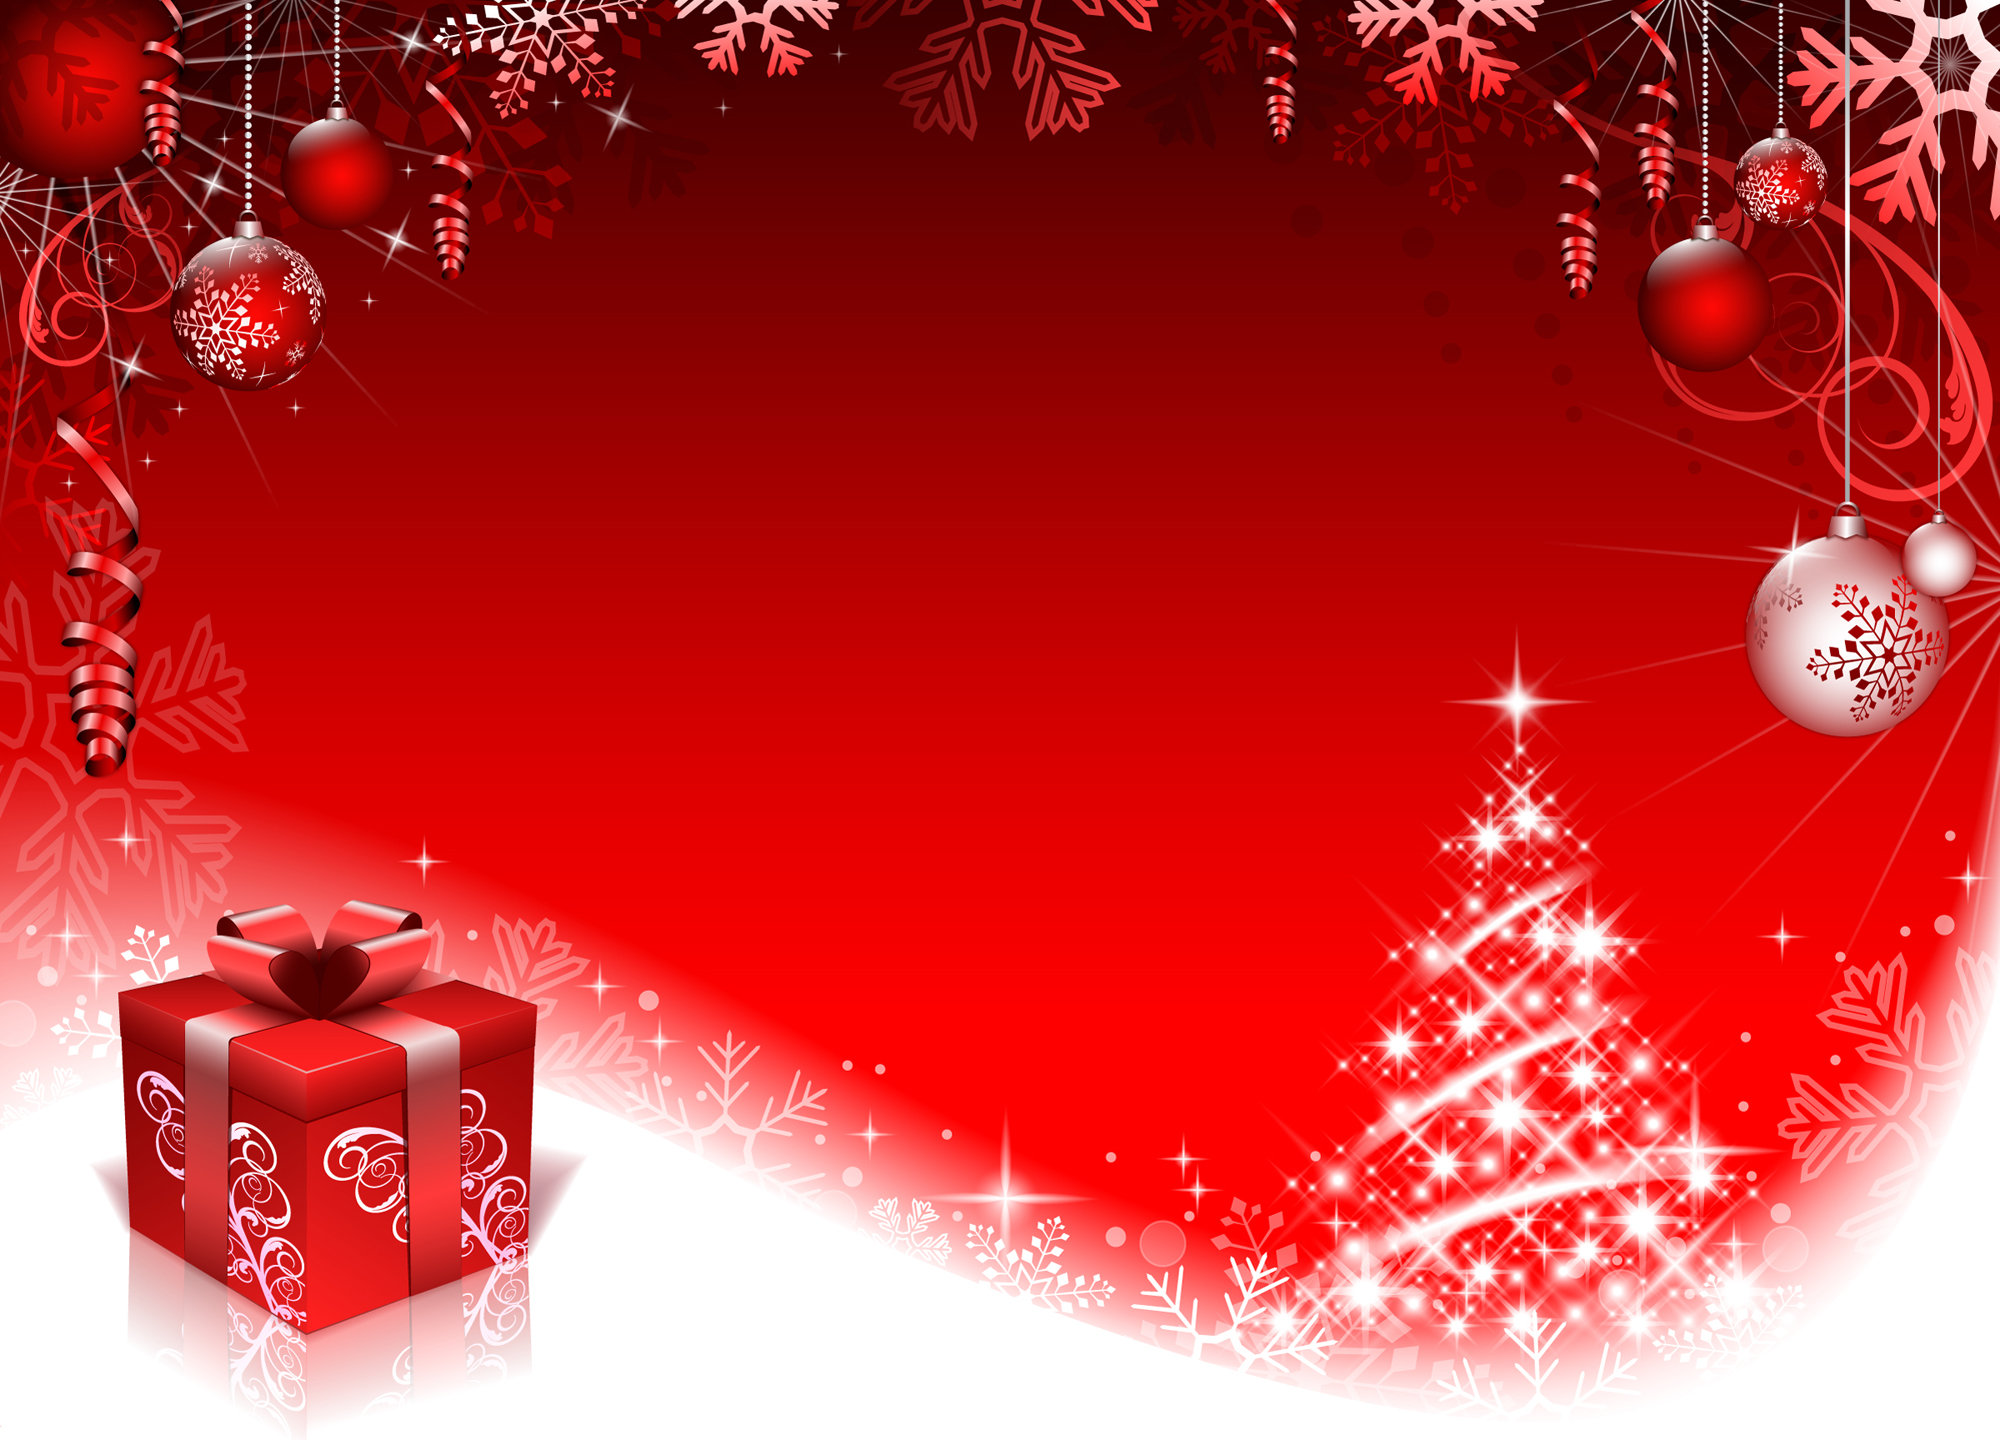 Christmas Backgrounds for Photoshop Wallpapers9 2000x1440